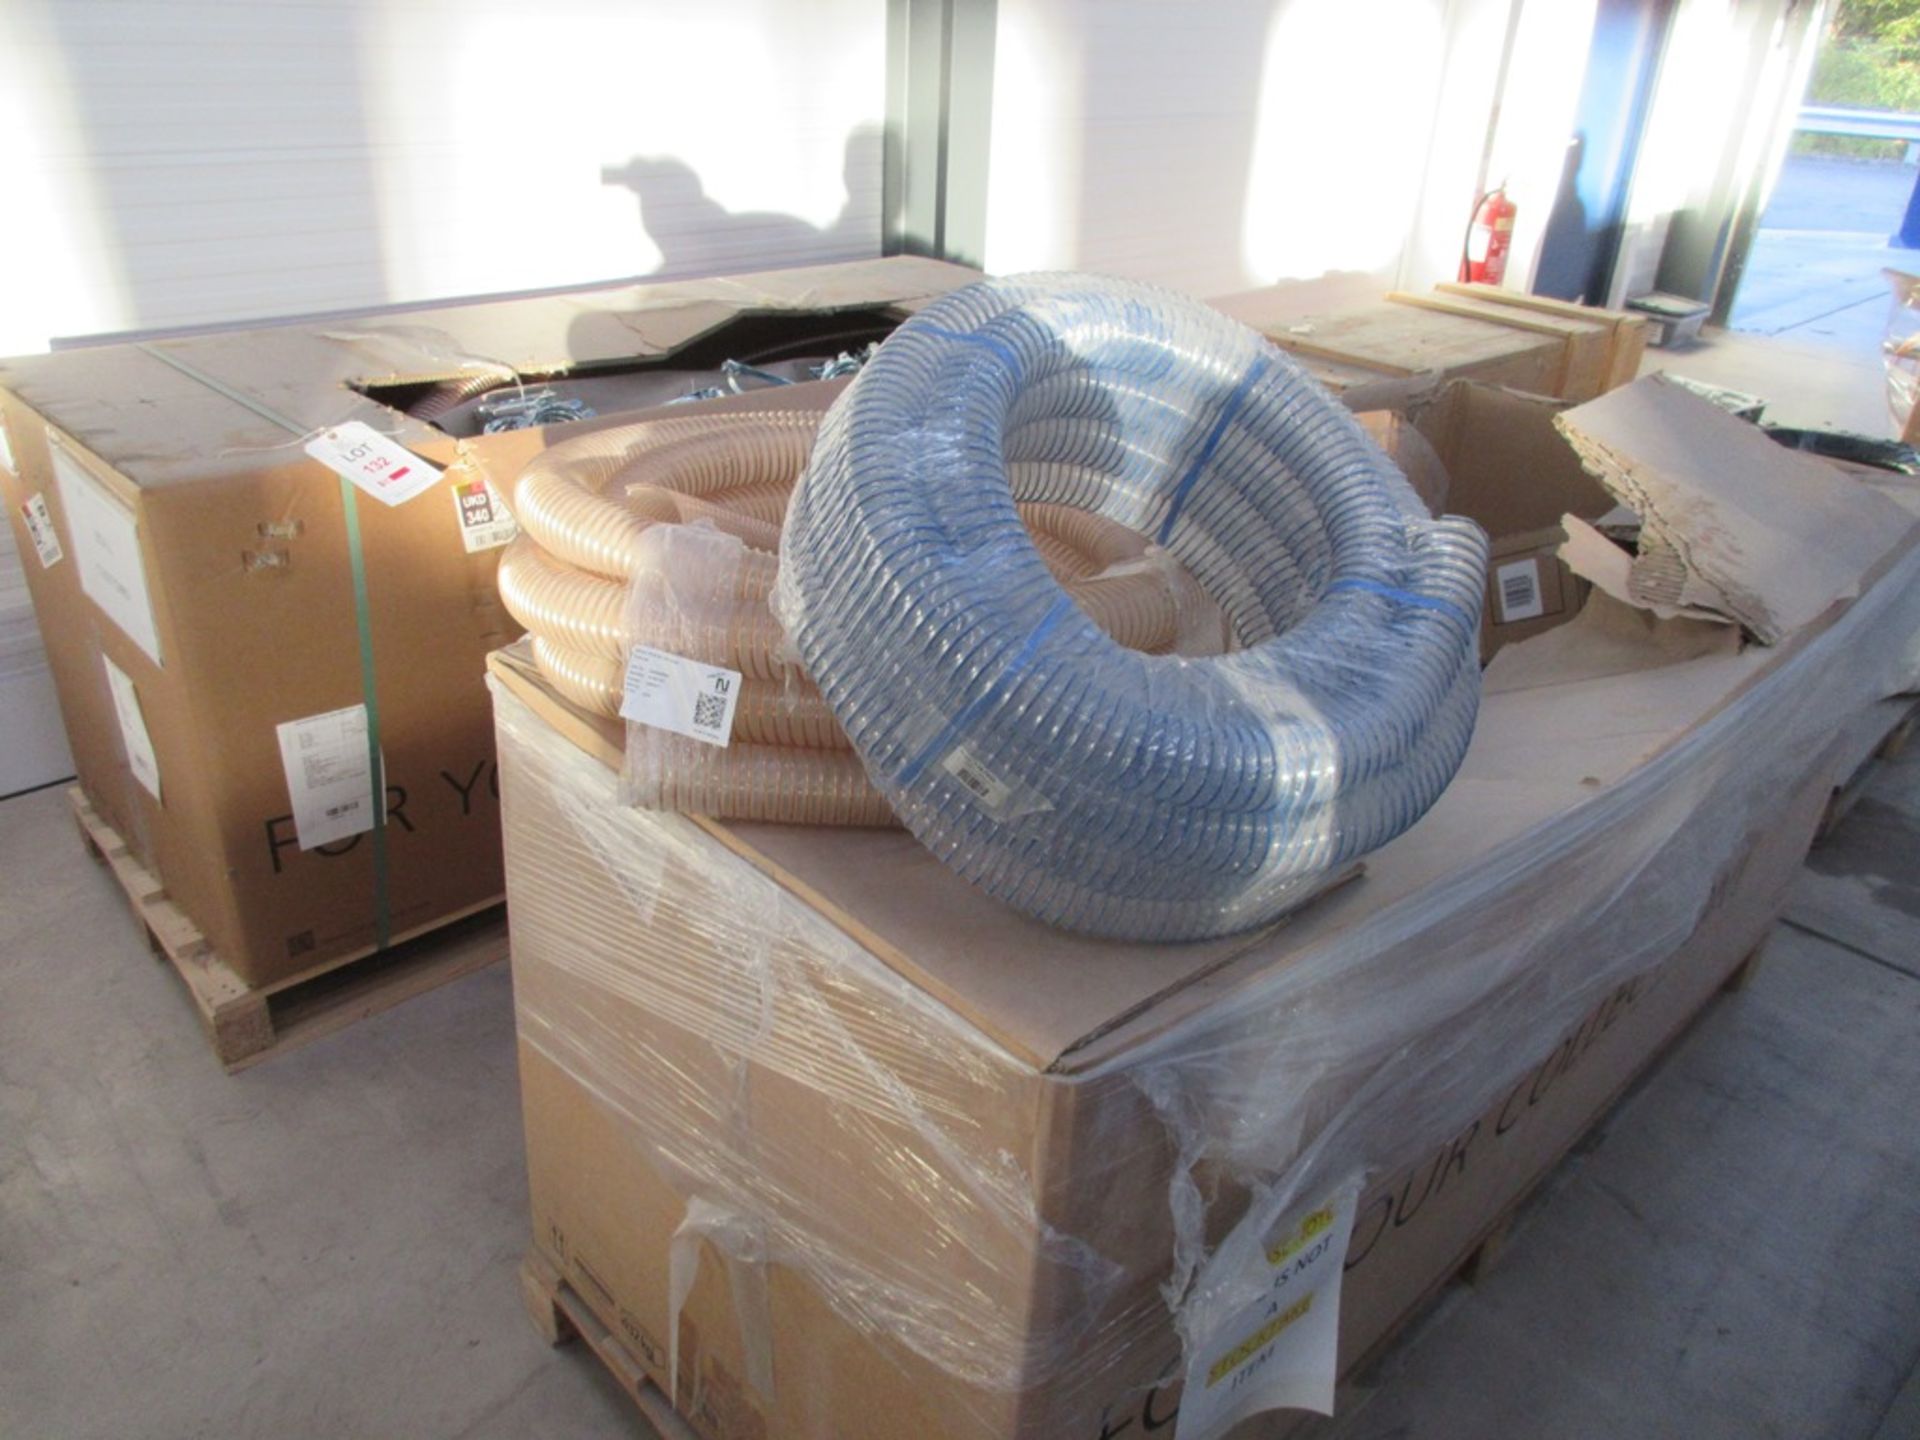 Two boxes of extraction hosing, steel pipe clips, ducting, etc.